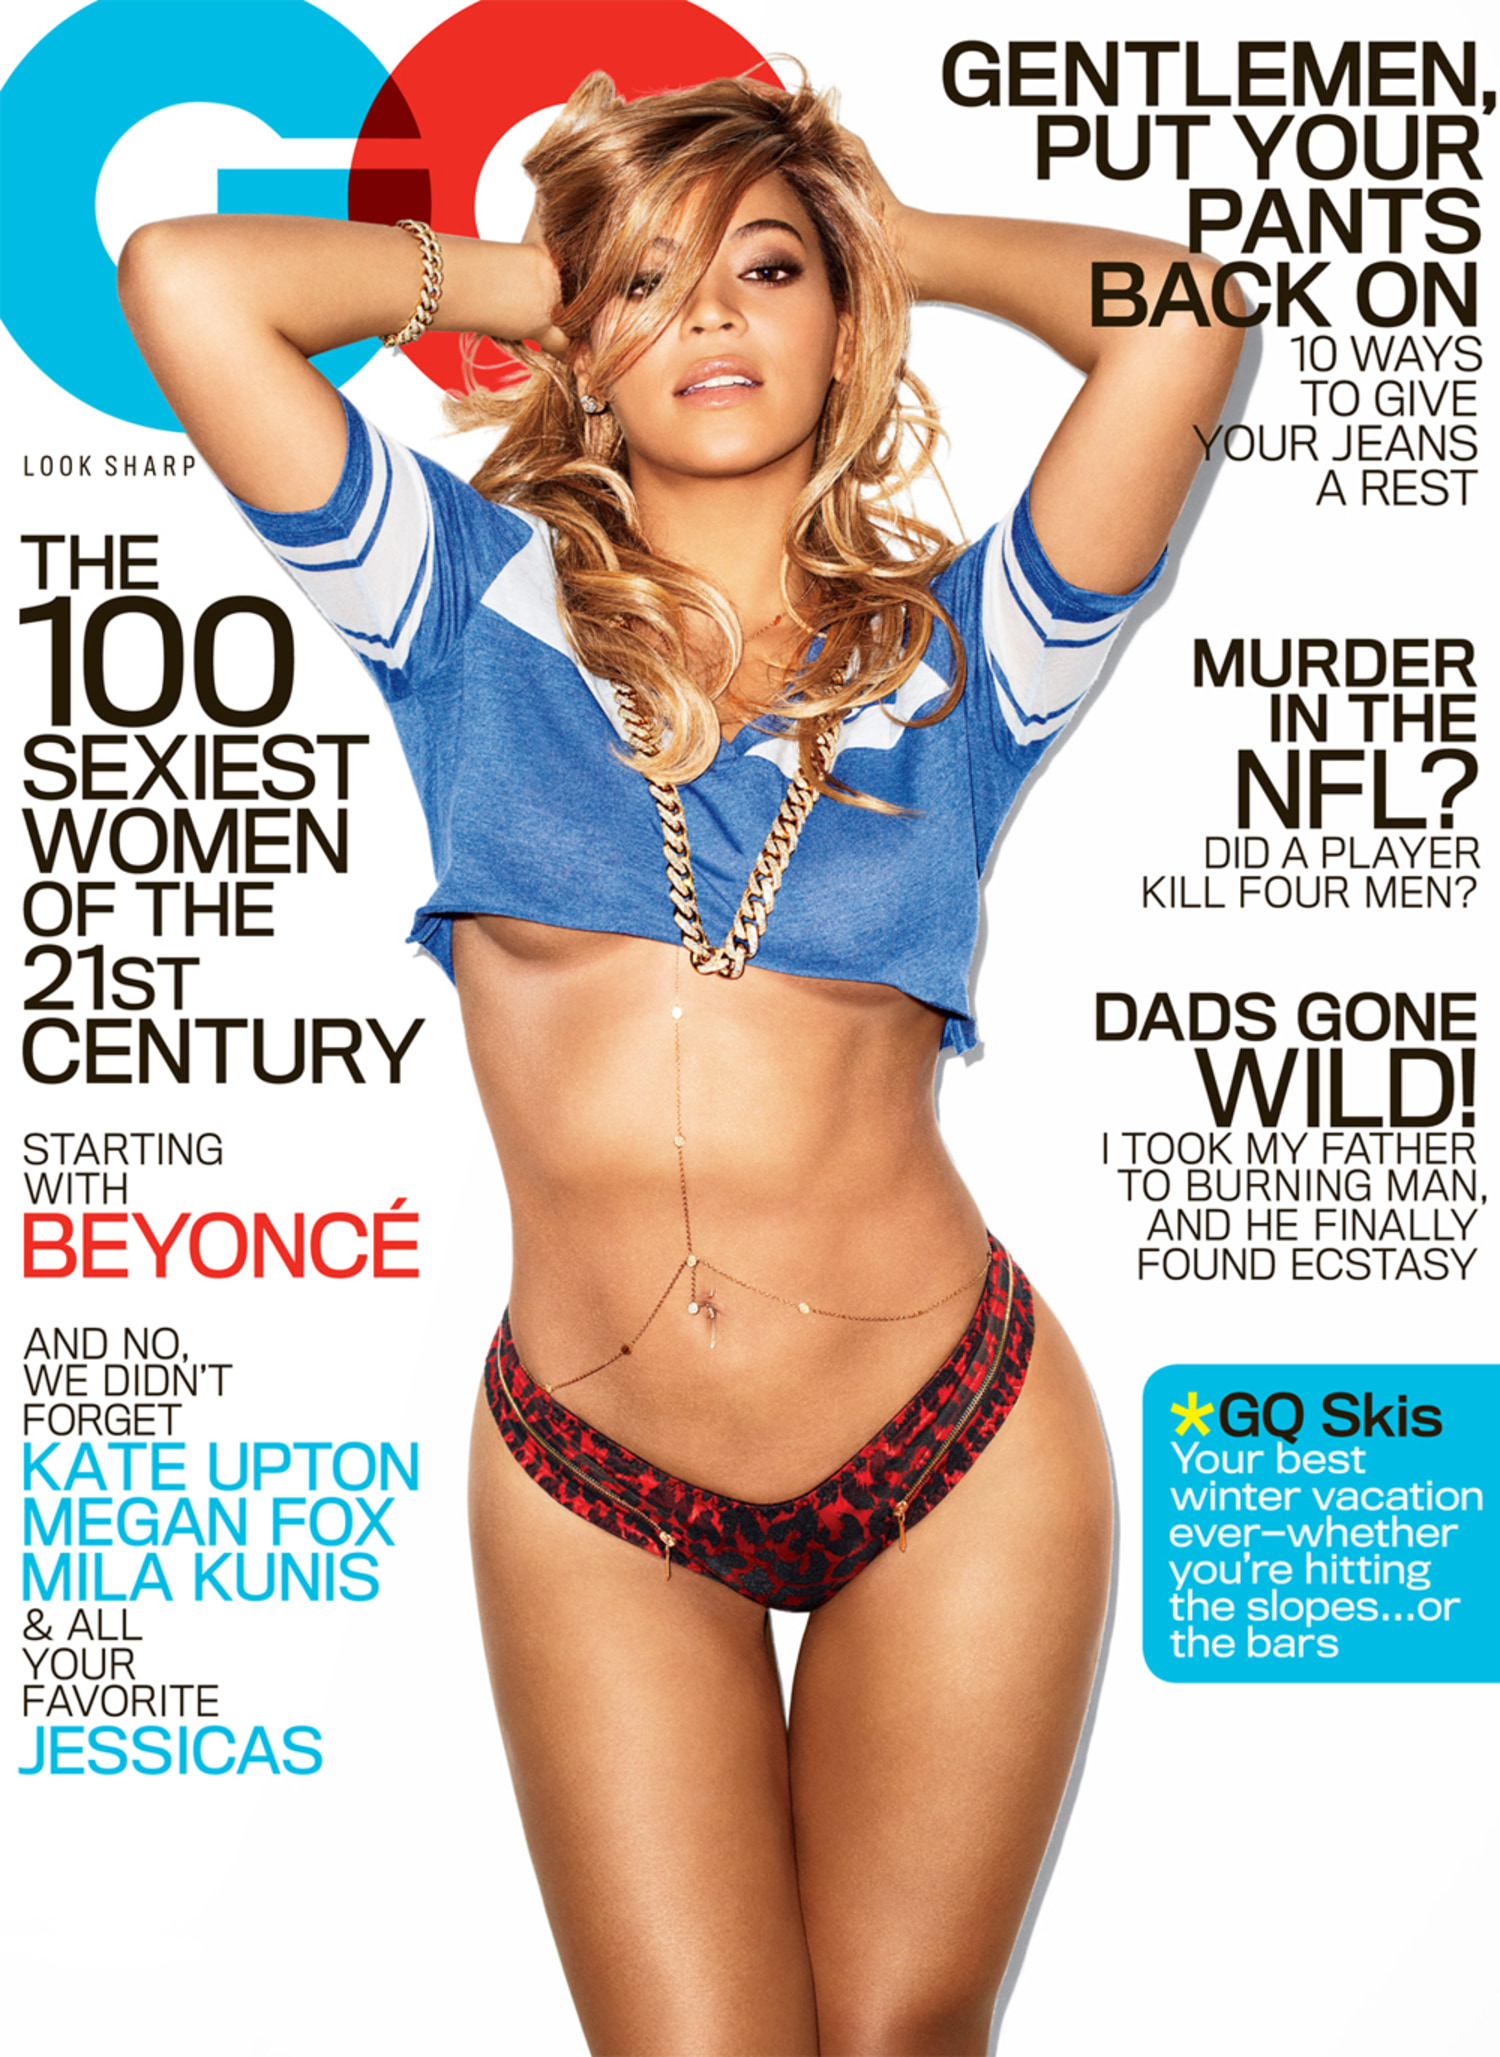 Beyonces amazing post-baby GQ cover has landed image